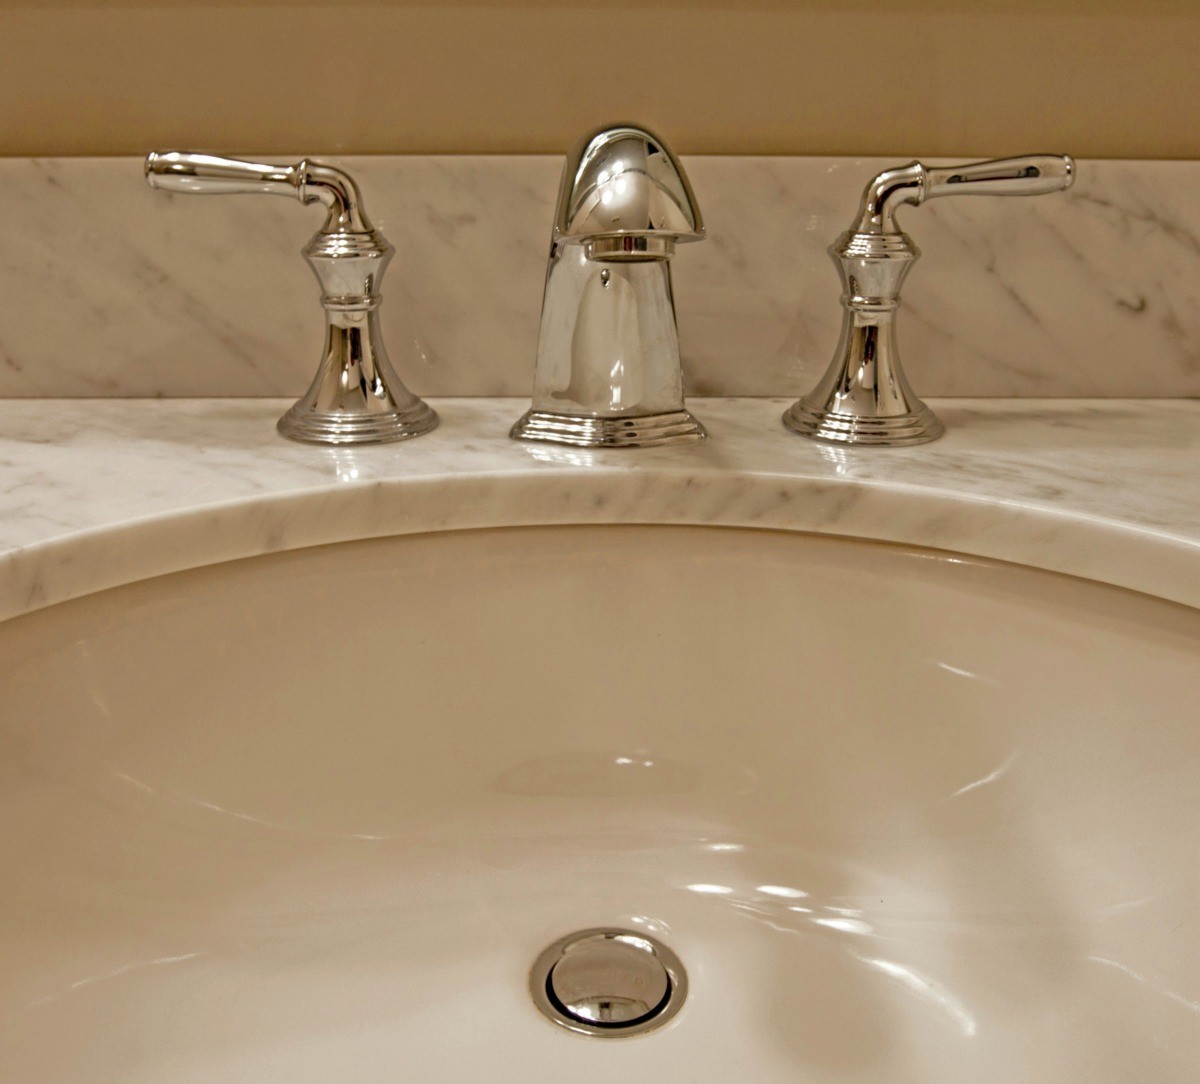 Removing Stains From A Porcelain Sink, How To Get Brown Water Stains Out Of Bathtub